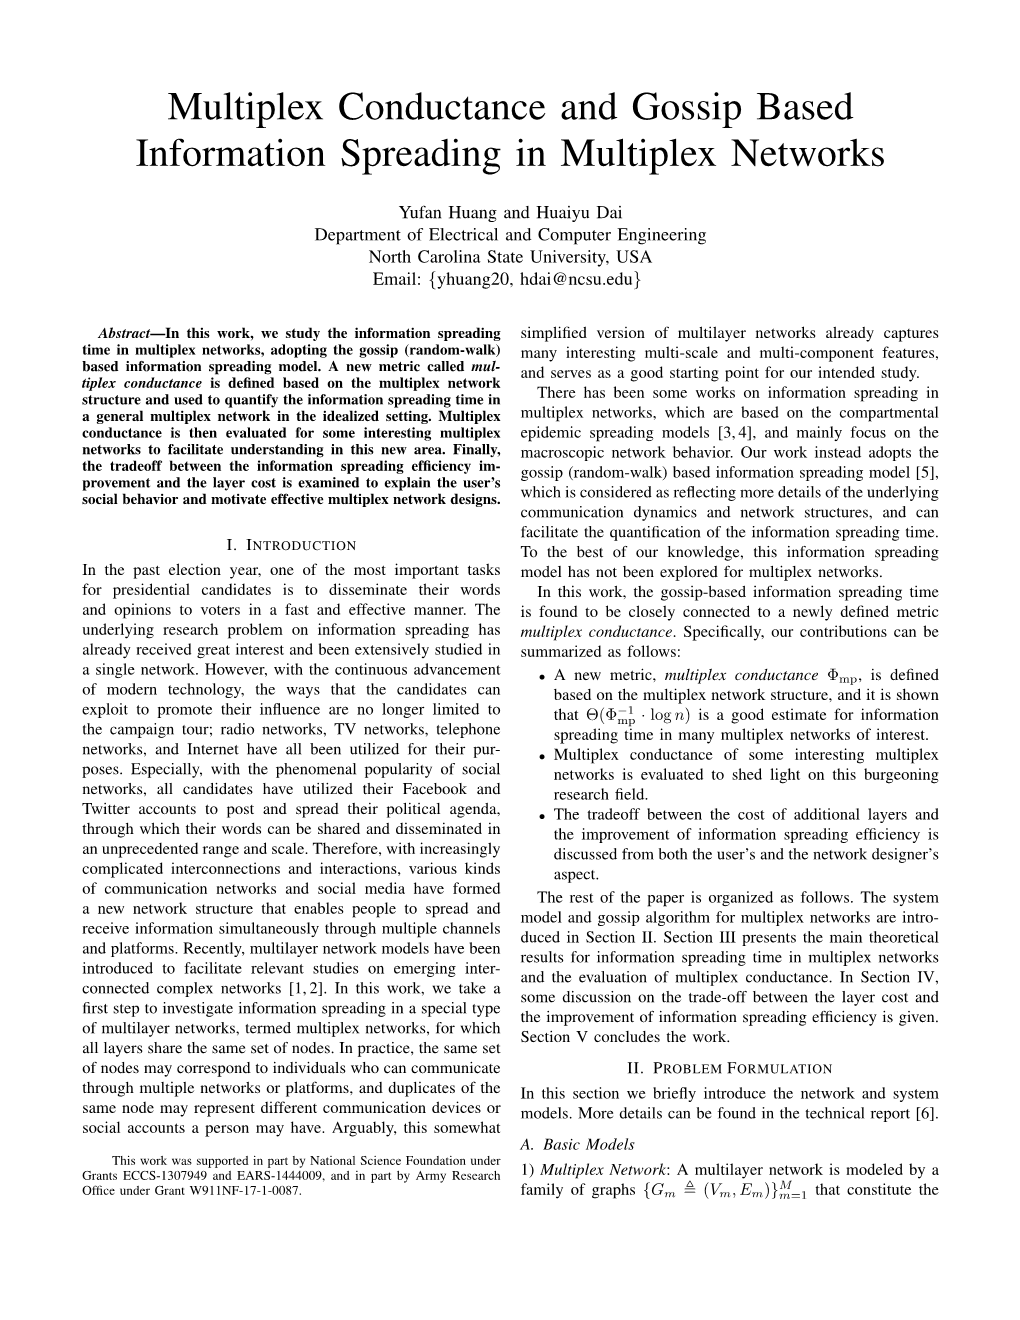 Multiplex Conductance and Gossip Based Information Spreading in Multiplex Networks